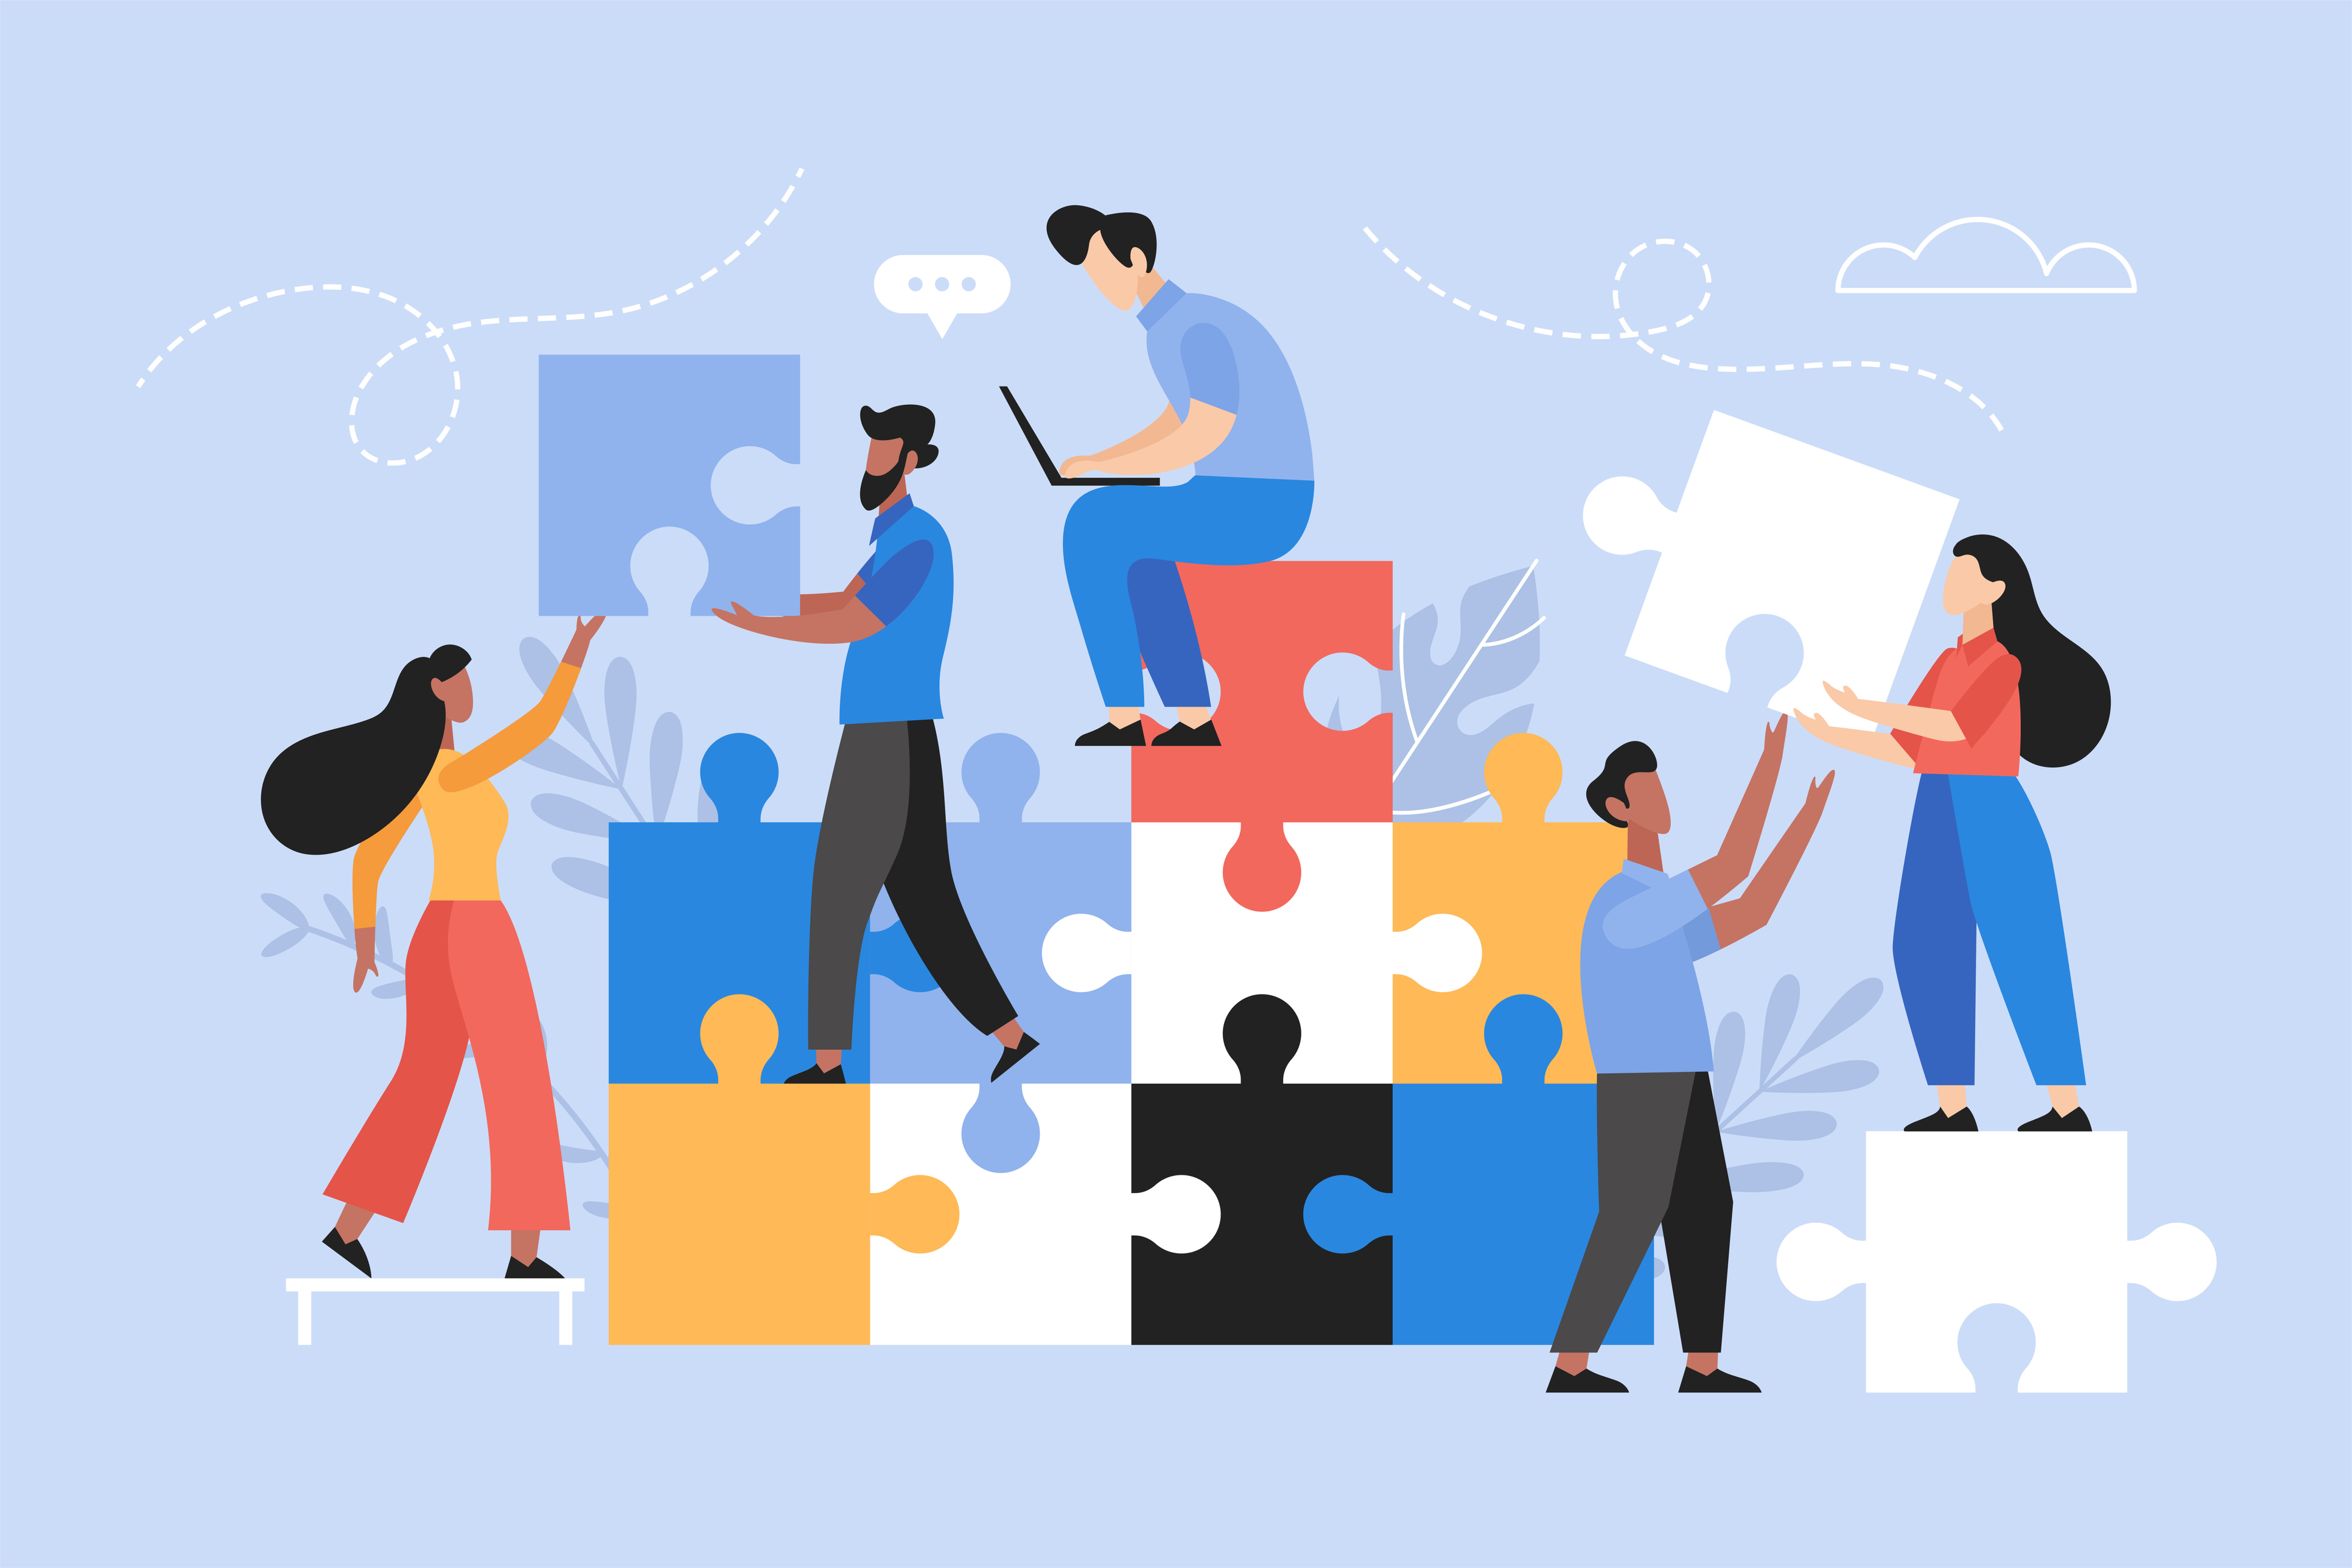 Composable Commerce People searching for creative solutions. Teamwork business concept. Modern vector illustration of people connecting puzzle elements